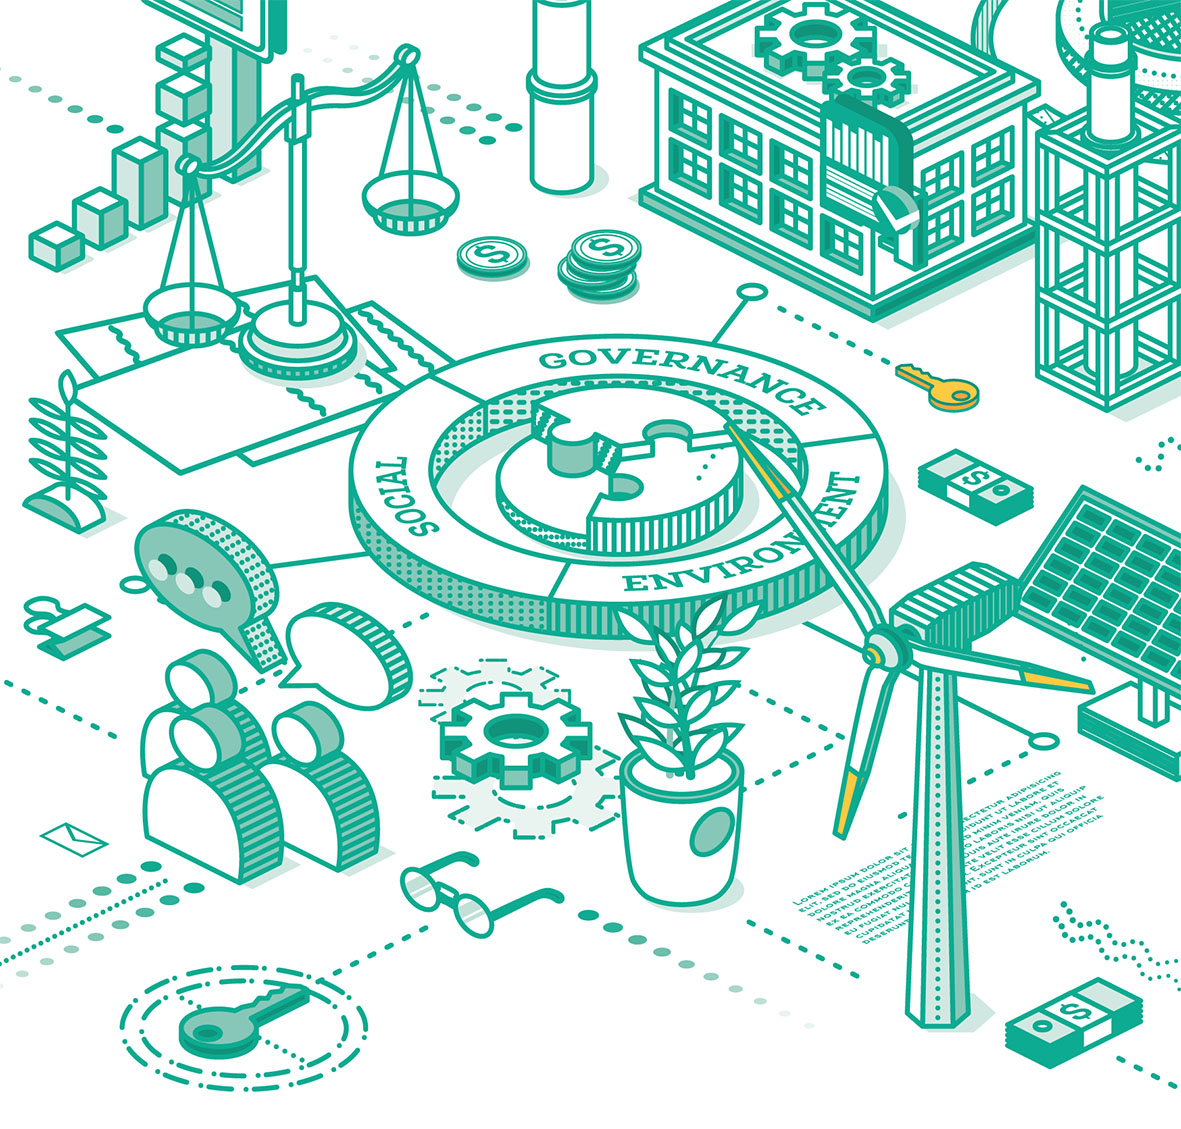 ESG Concept of Environmental, Social and Governance. Vector Illustration. Sustainable Development. Isometric Outline Concept. Green Color. Alternative Energy. Talking People.